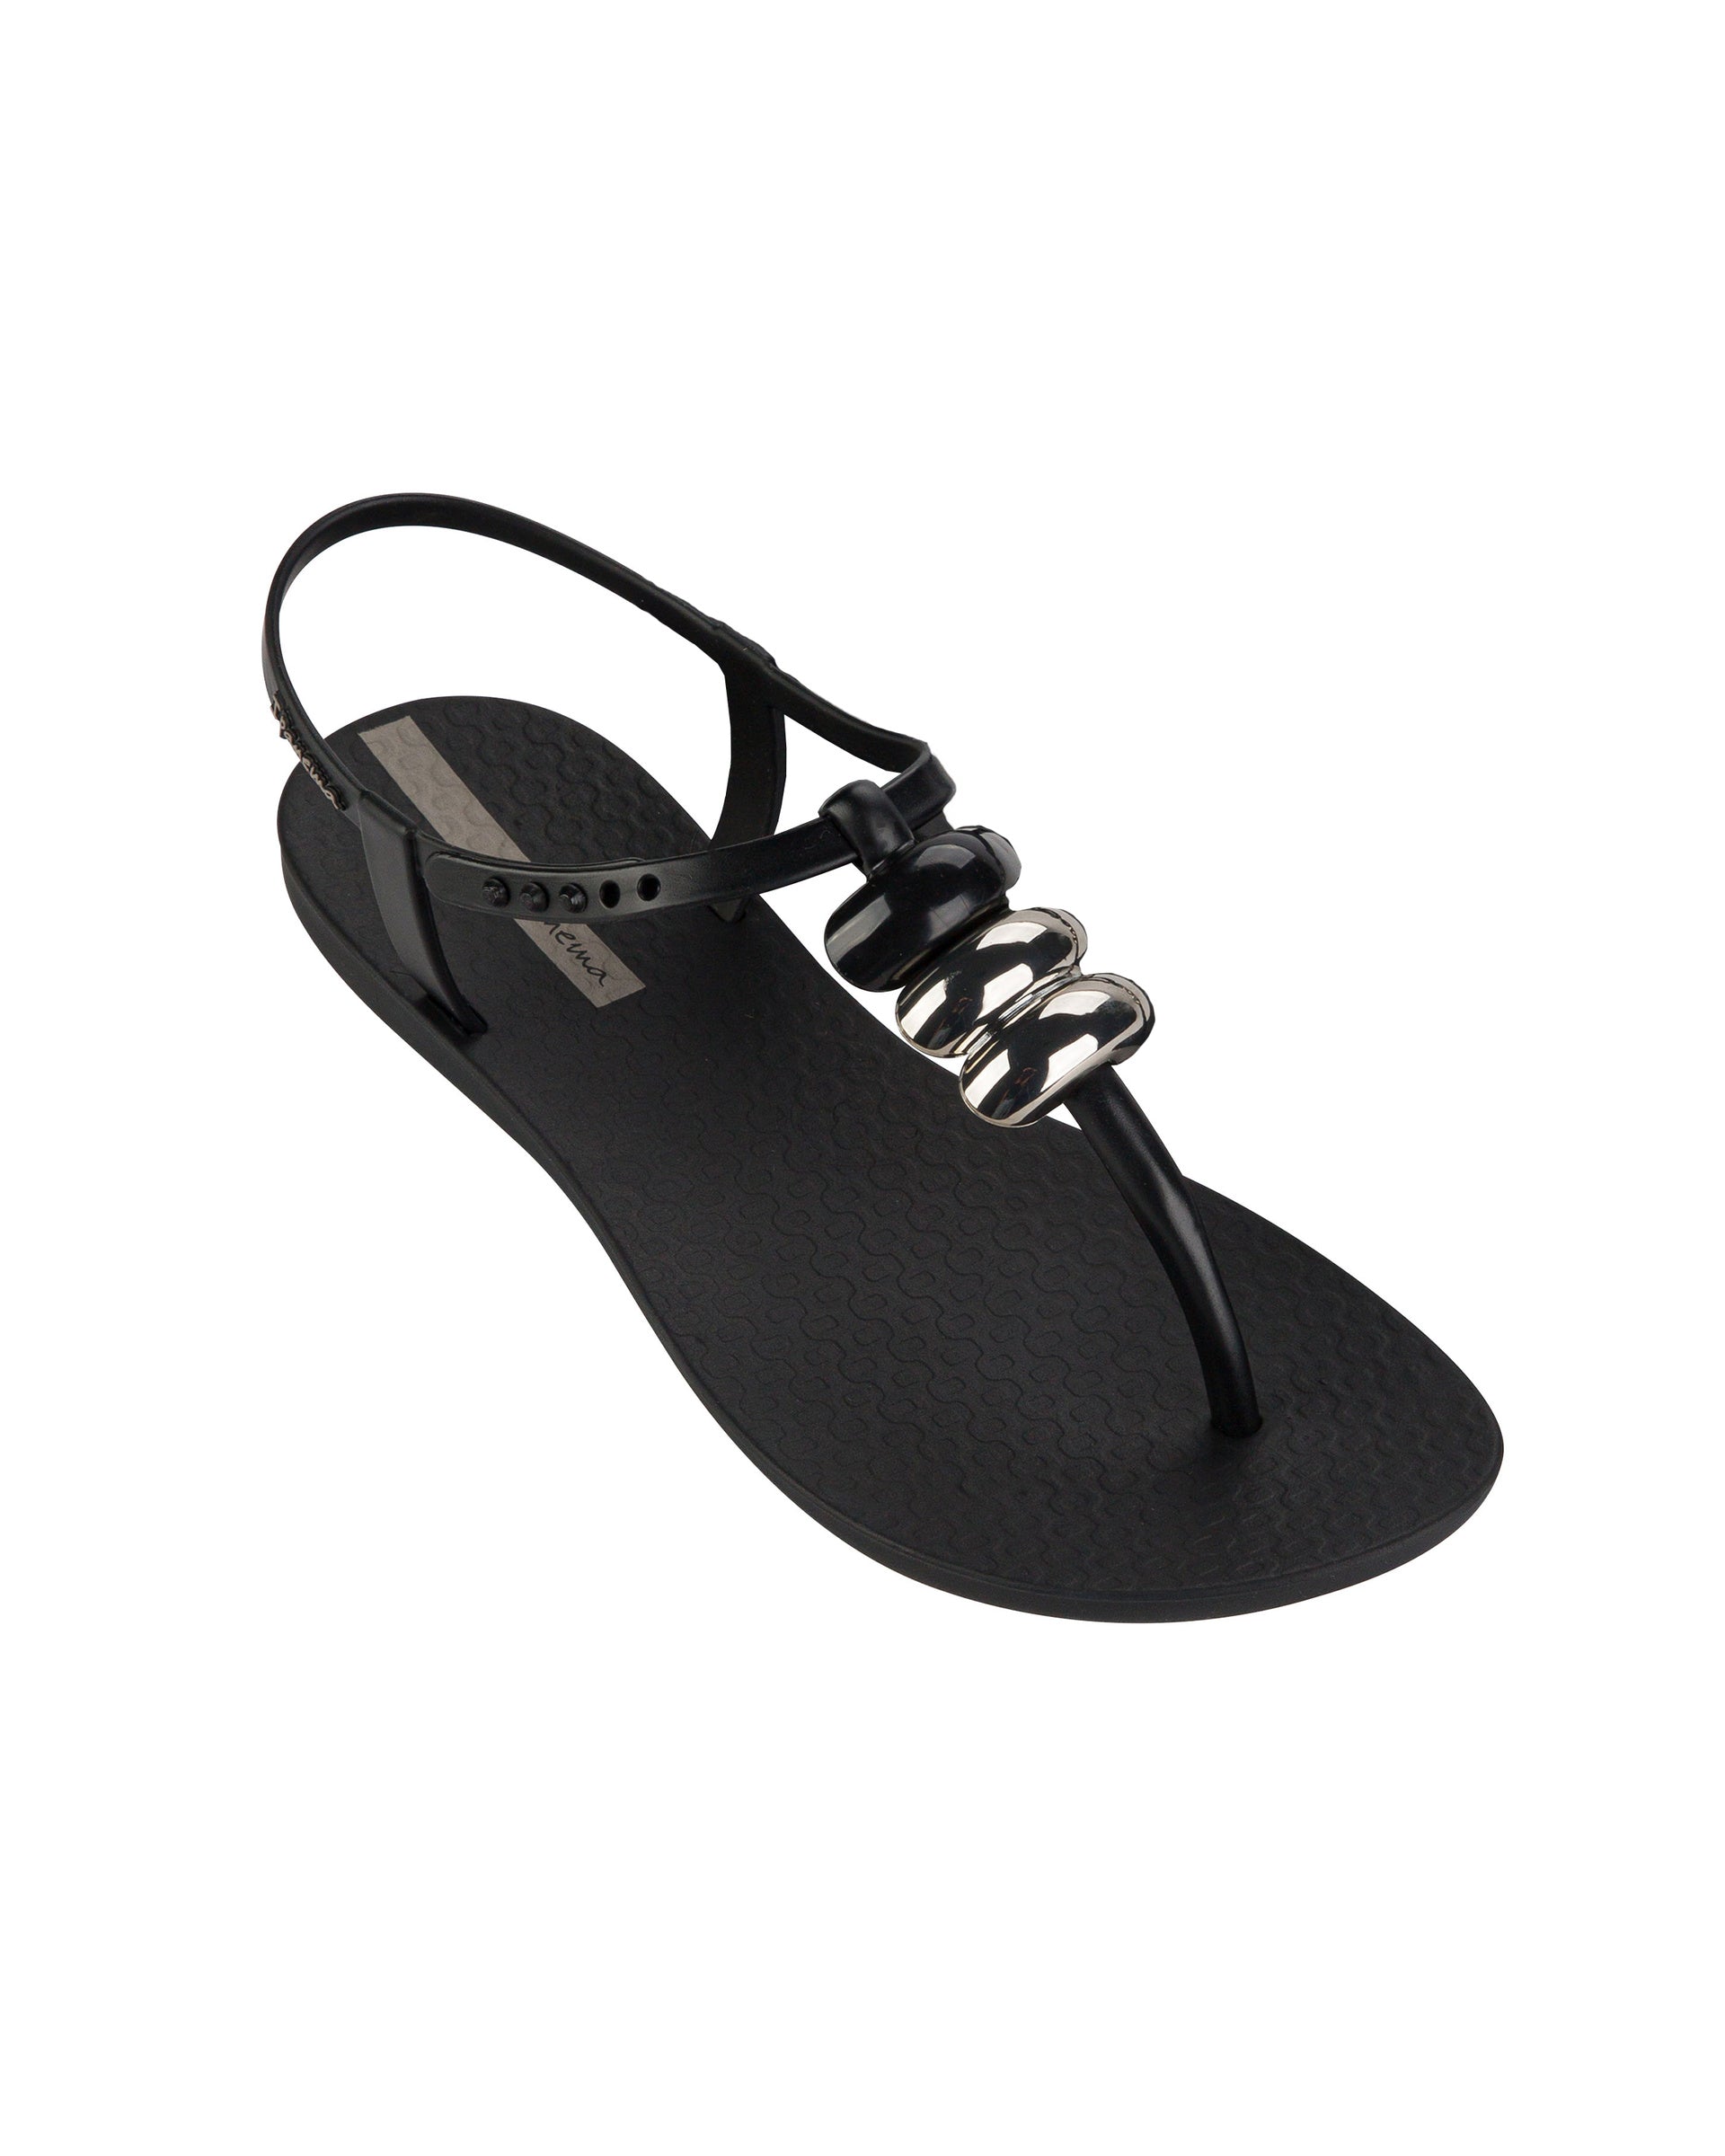 Angled view of a black Ipanema Class women's sandal with 3 bubble baubles on the t-strap.